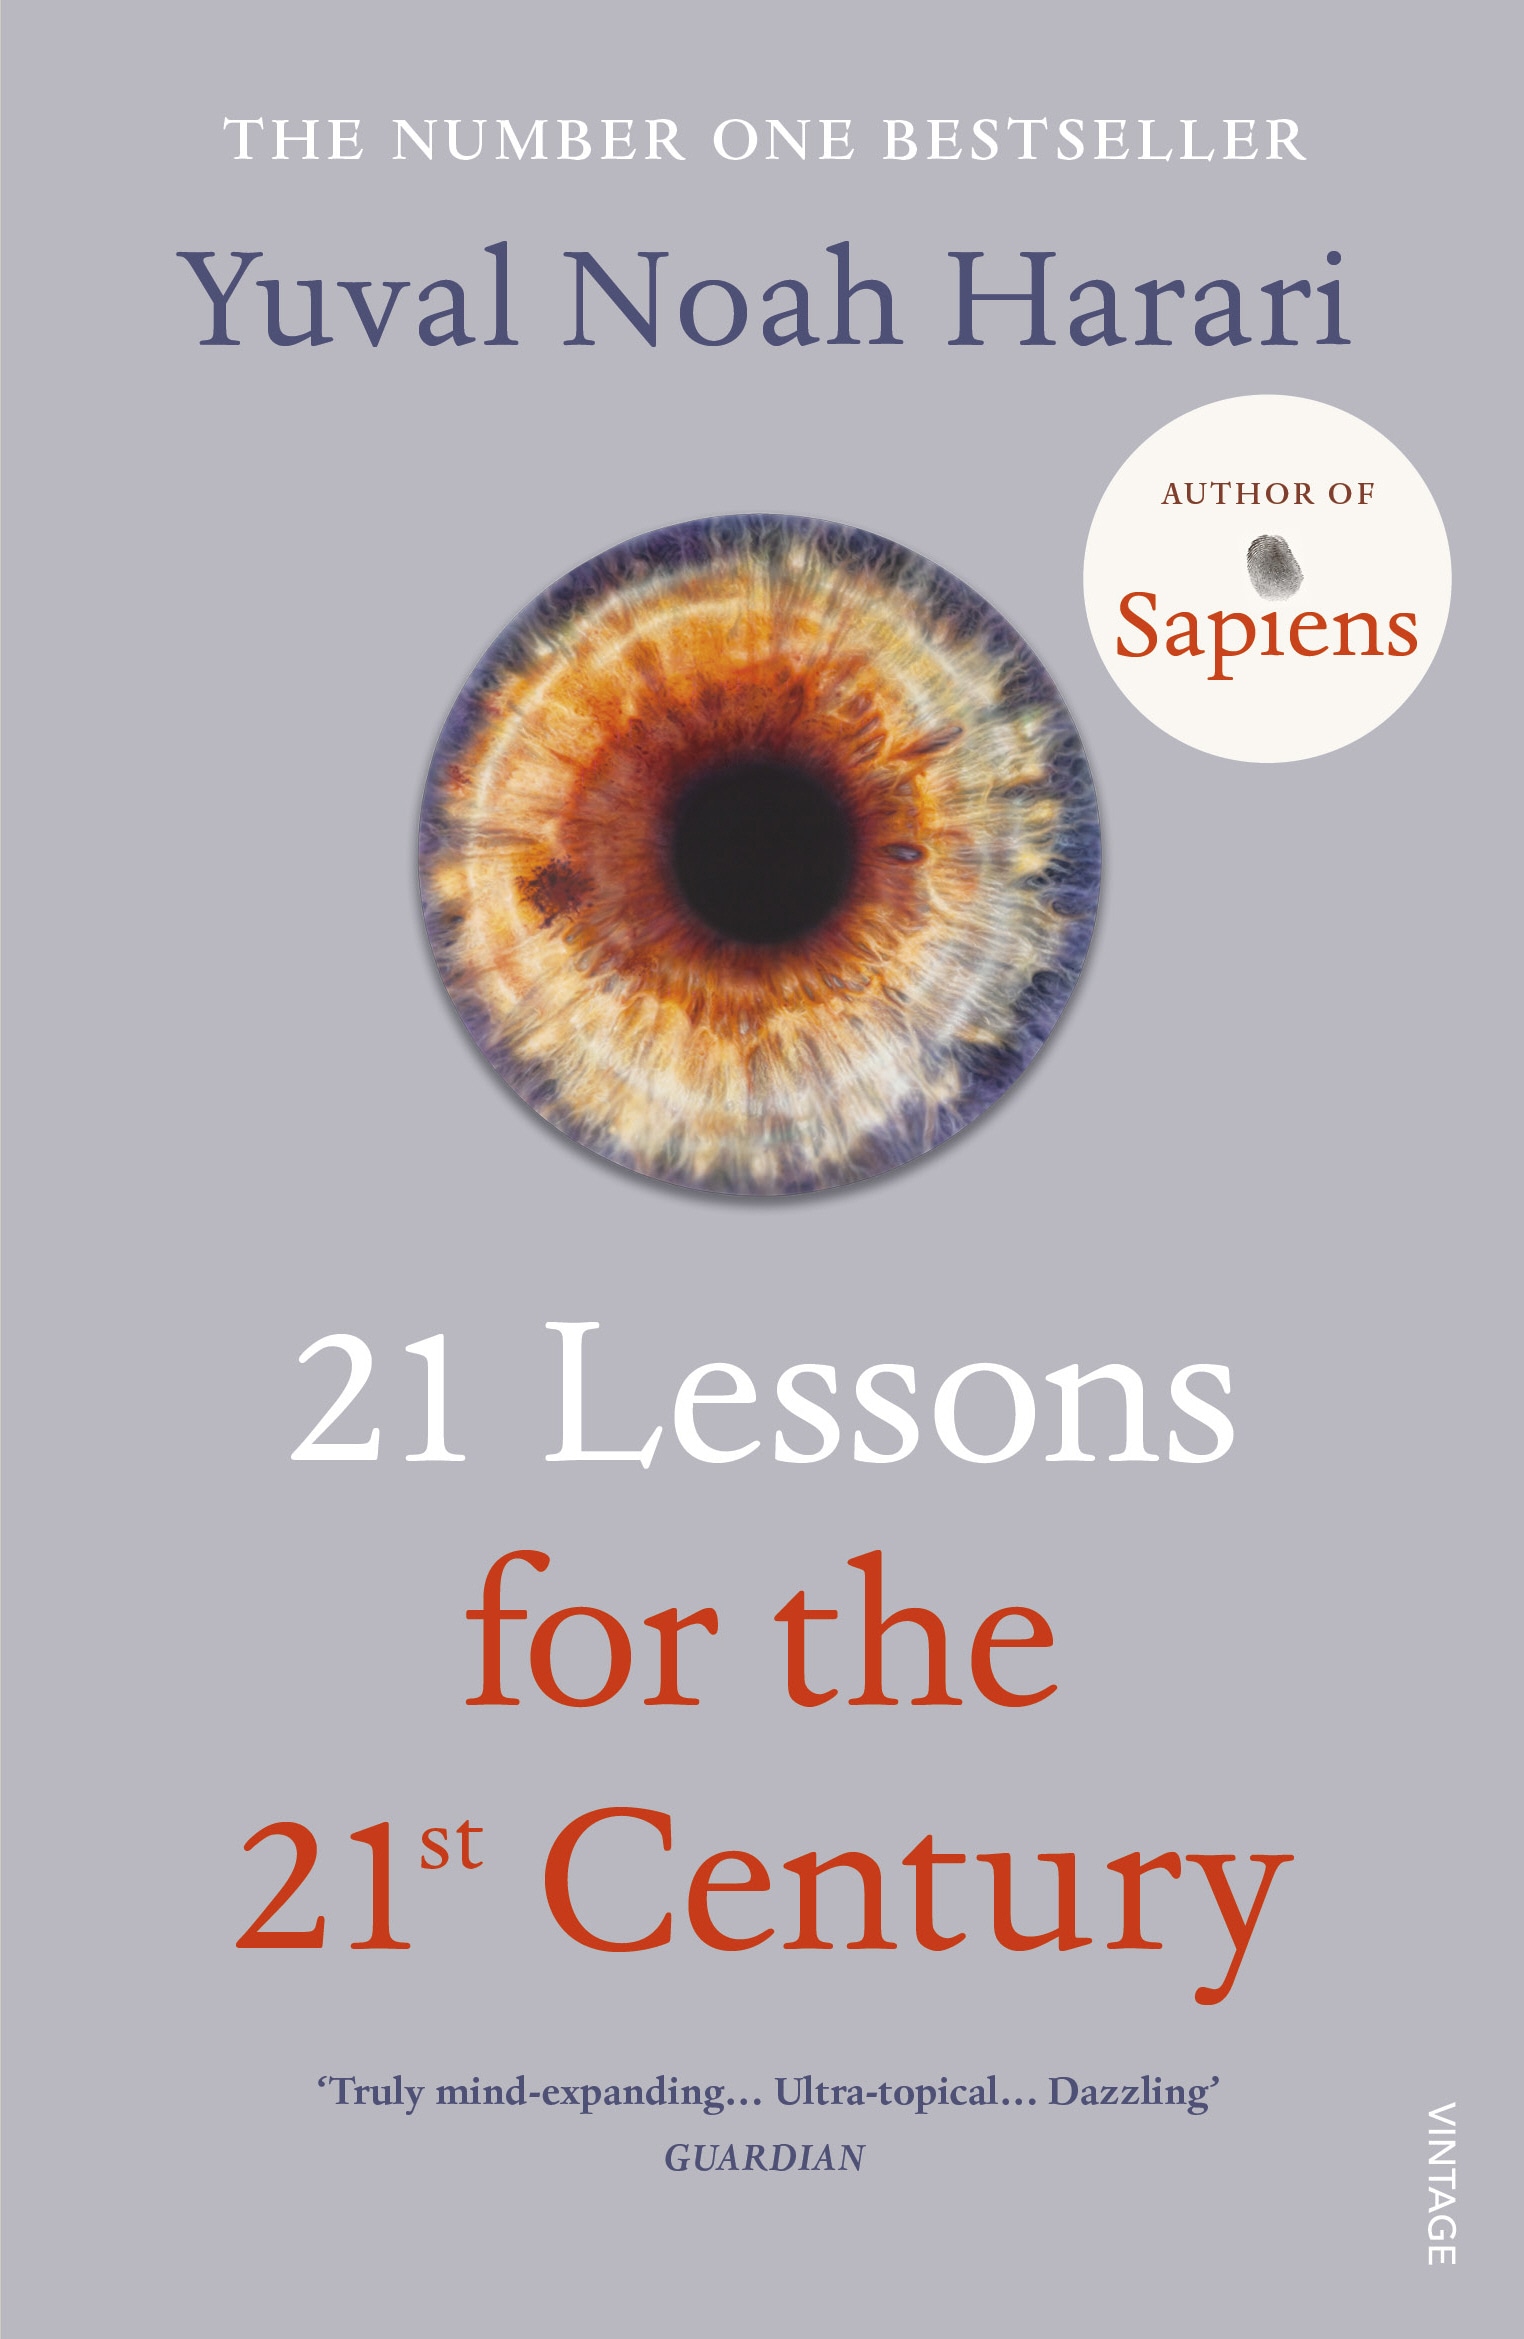 Book “21 Lessons for the 21st Century” by Yuval Noah Harari — August 22, 2019